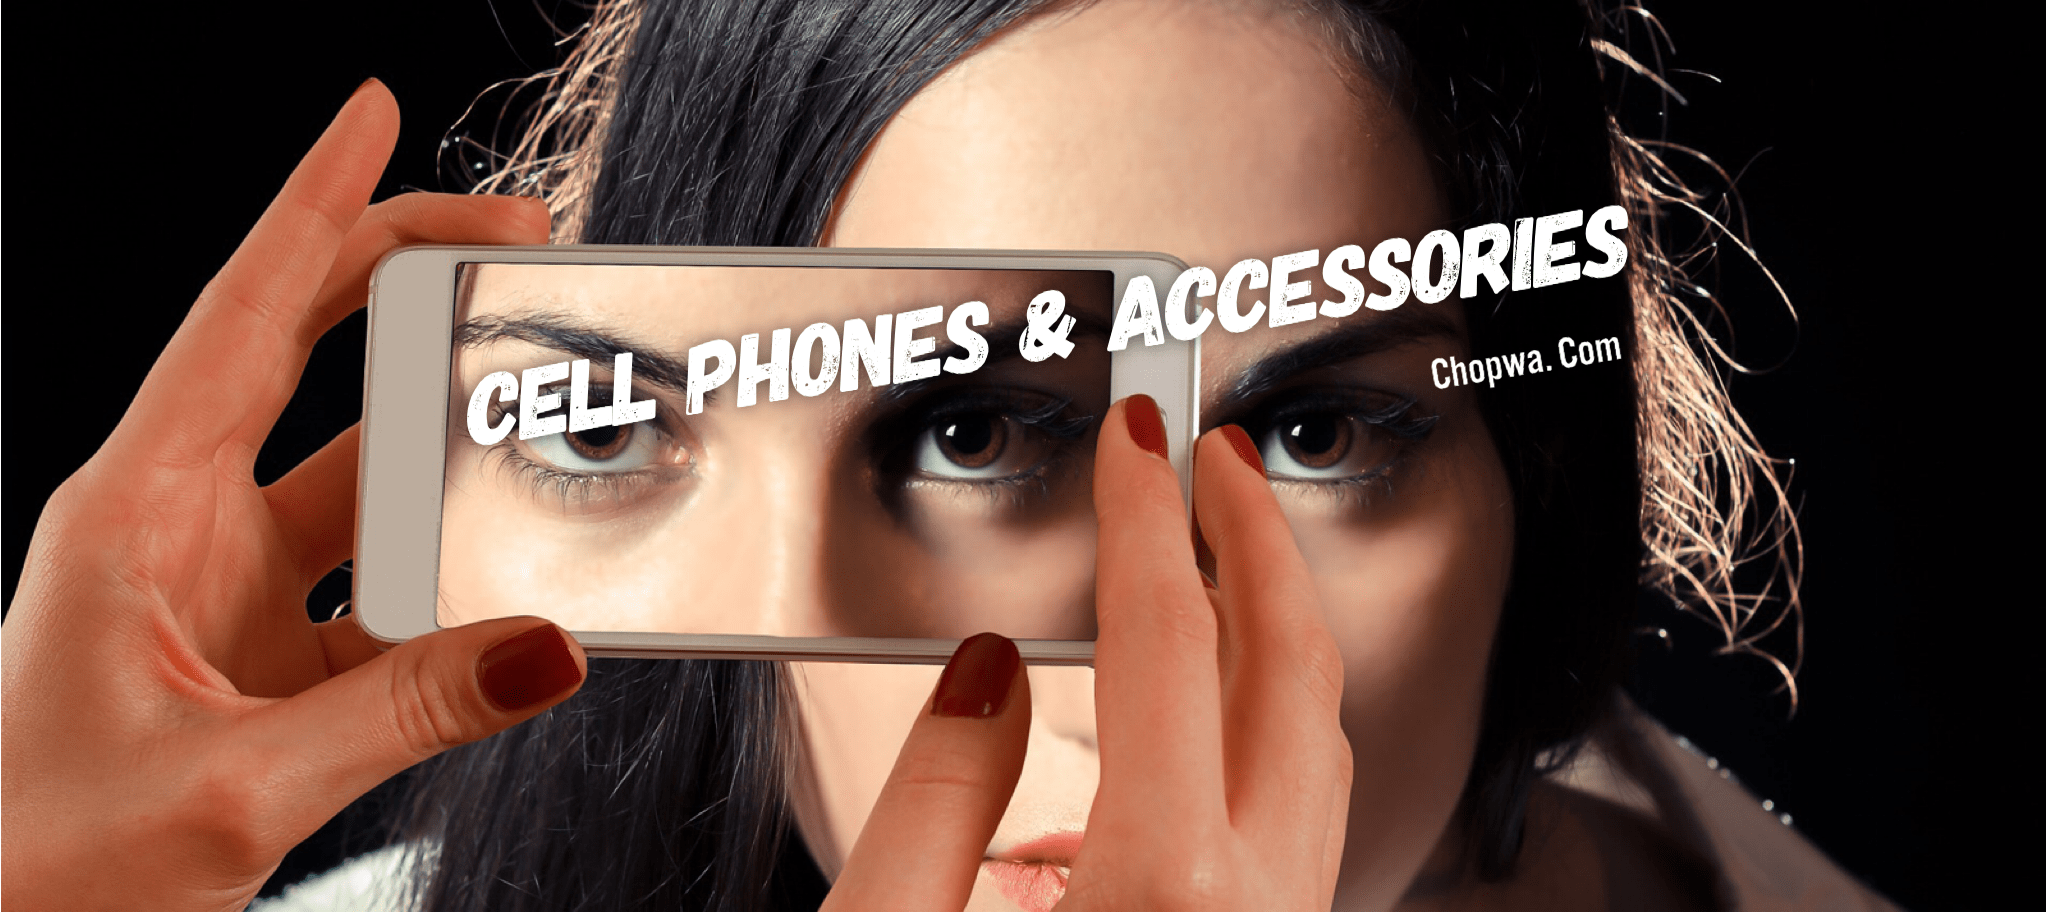 Cell phones and accessories